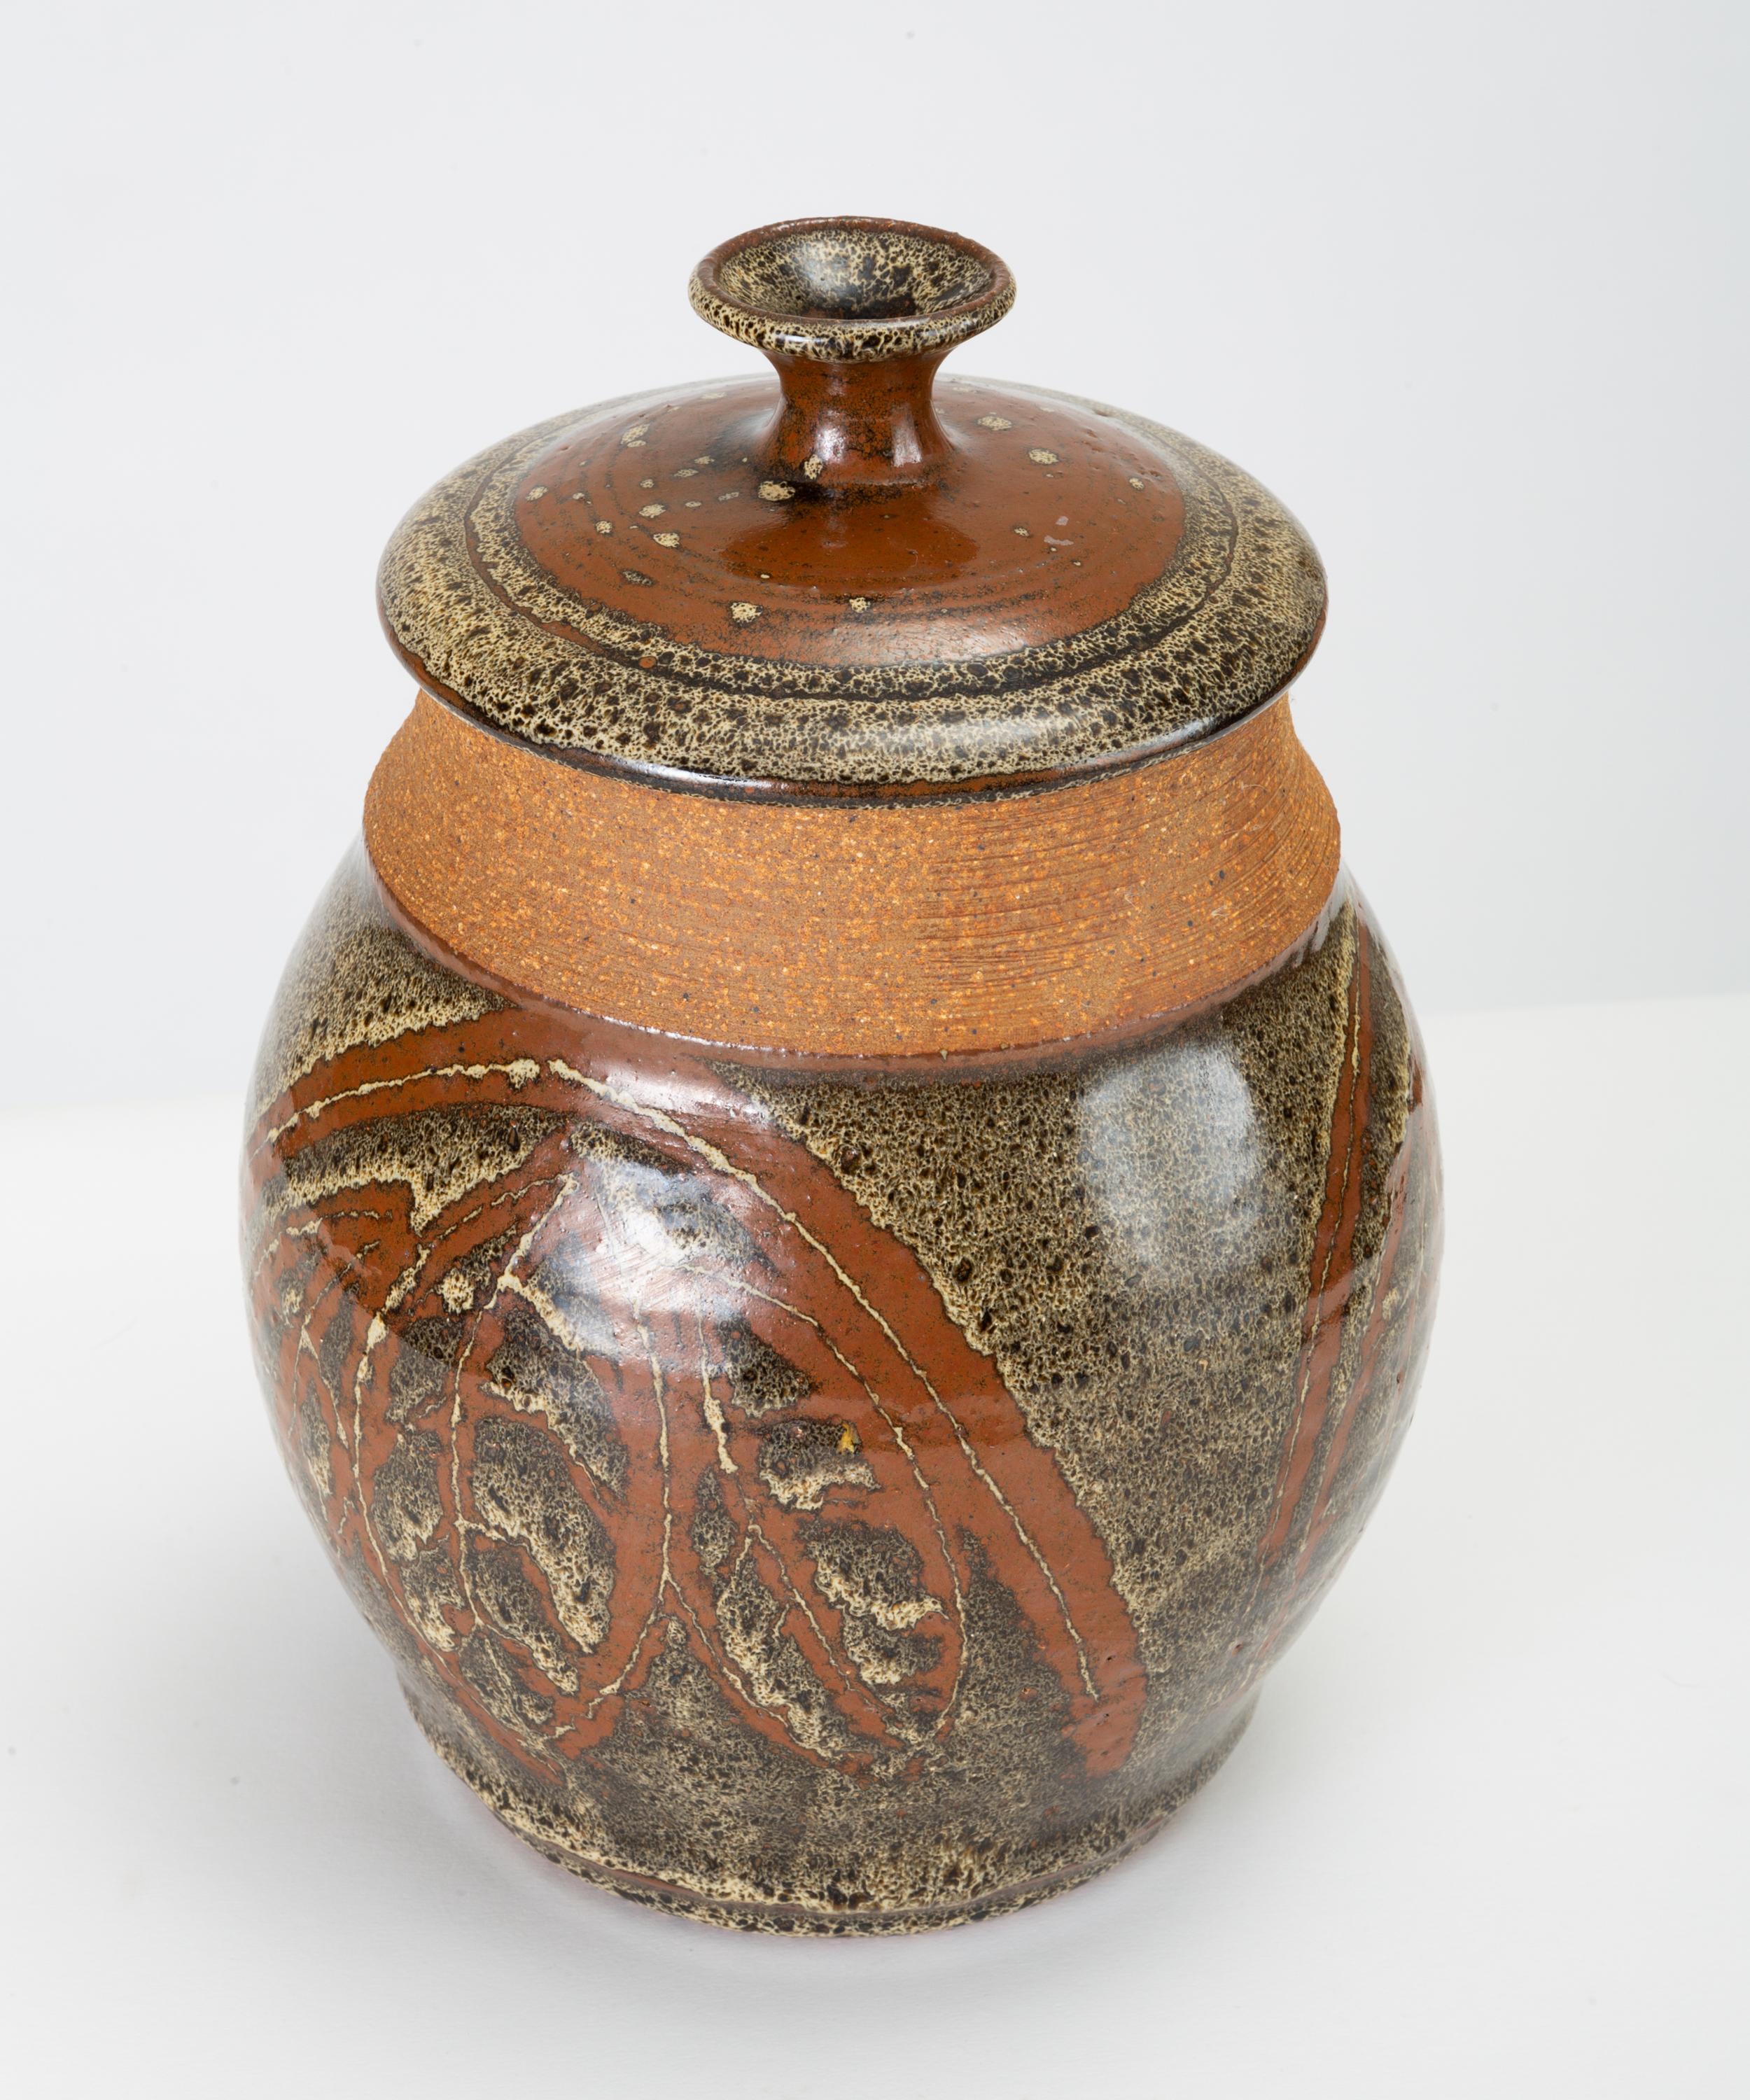 20th Century California Modern Studio Pottery Urn with Leaf Pattern by Don Jennings